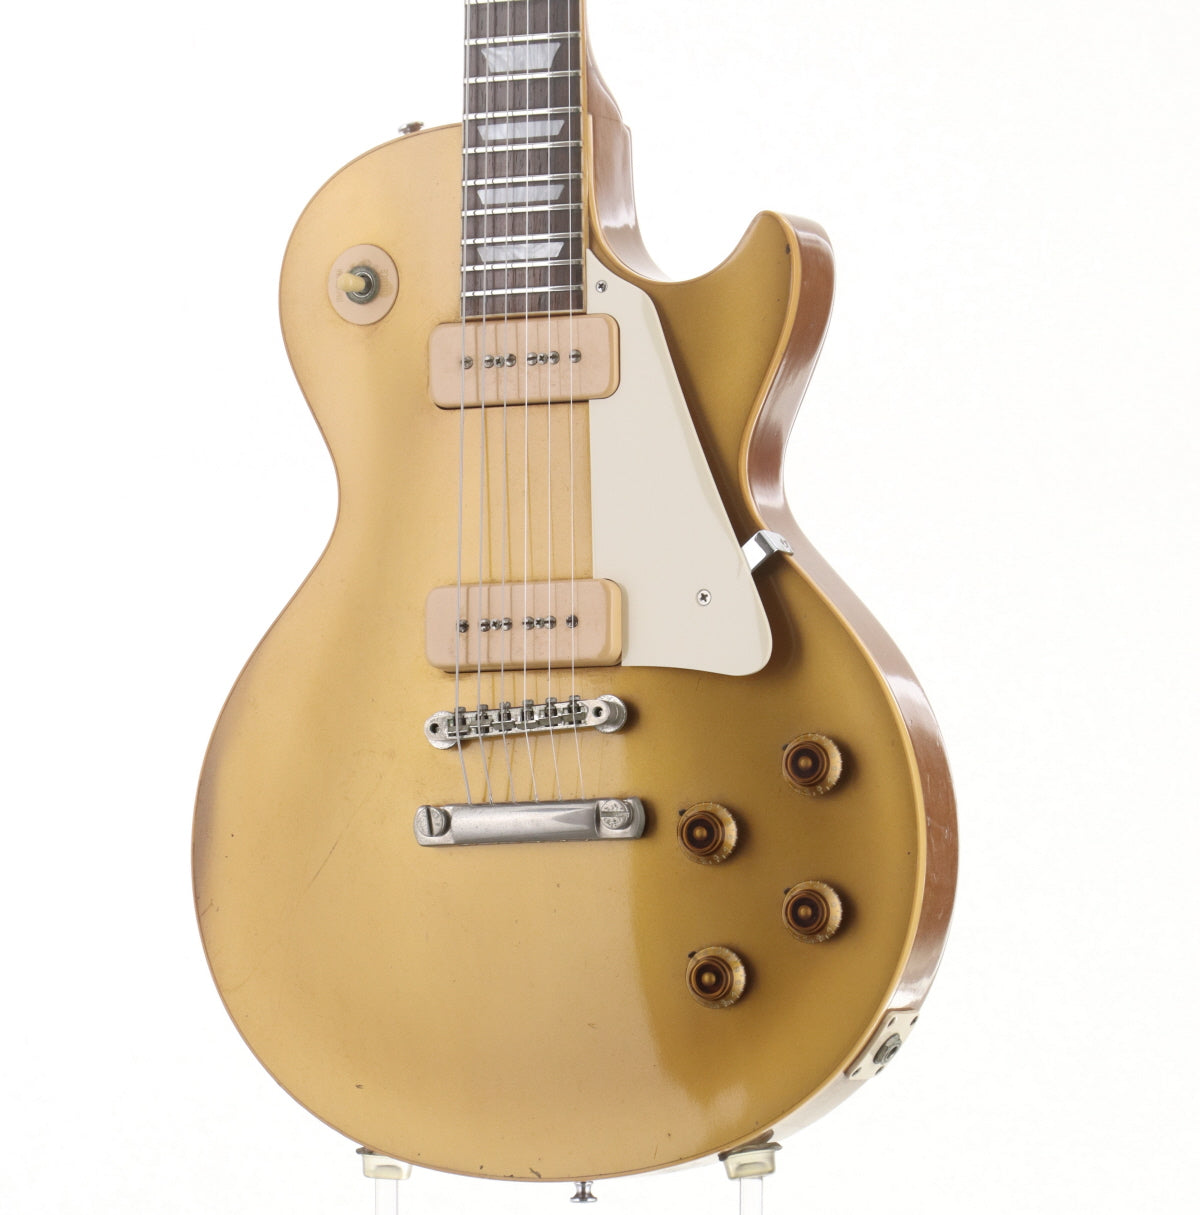 [SN 6 1244] USED Gibson Custom Shop / Historic Collection 1956 Les Paul Gold Top Reissue [03]